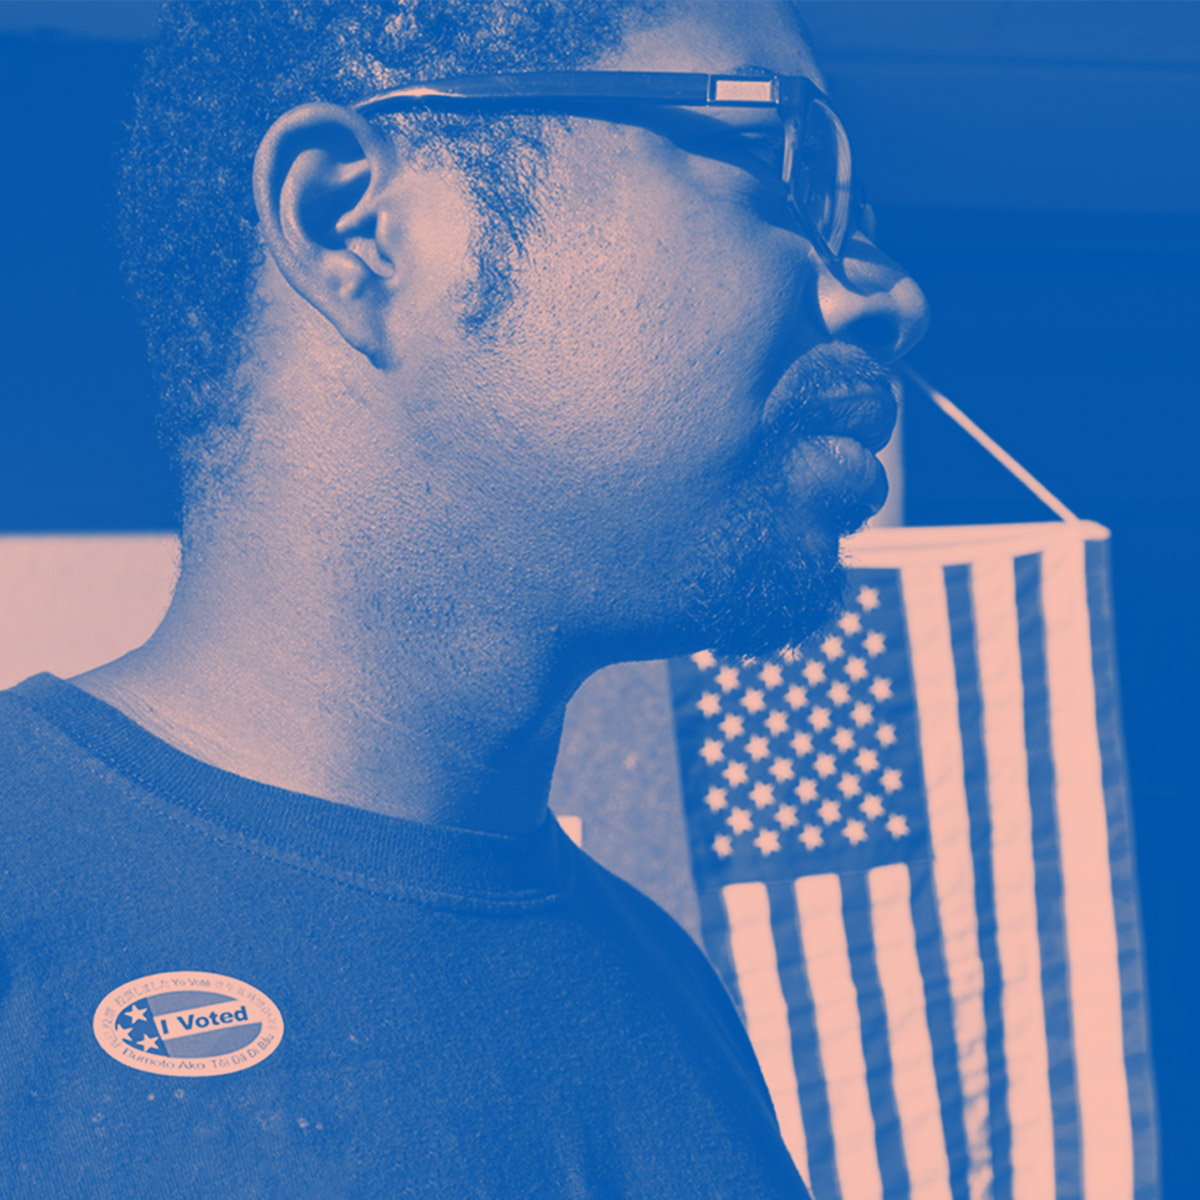 A man wears an "I Voted" stick with the American flag hanging in the background. Image tinted blue and pink.